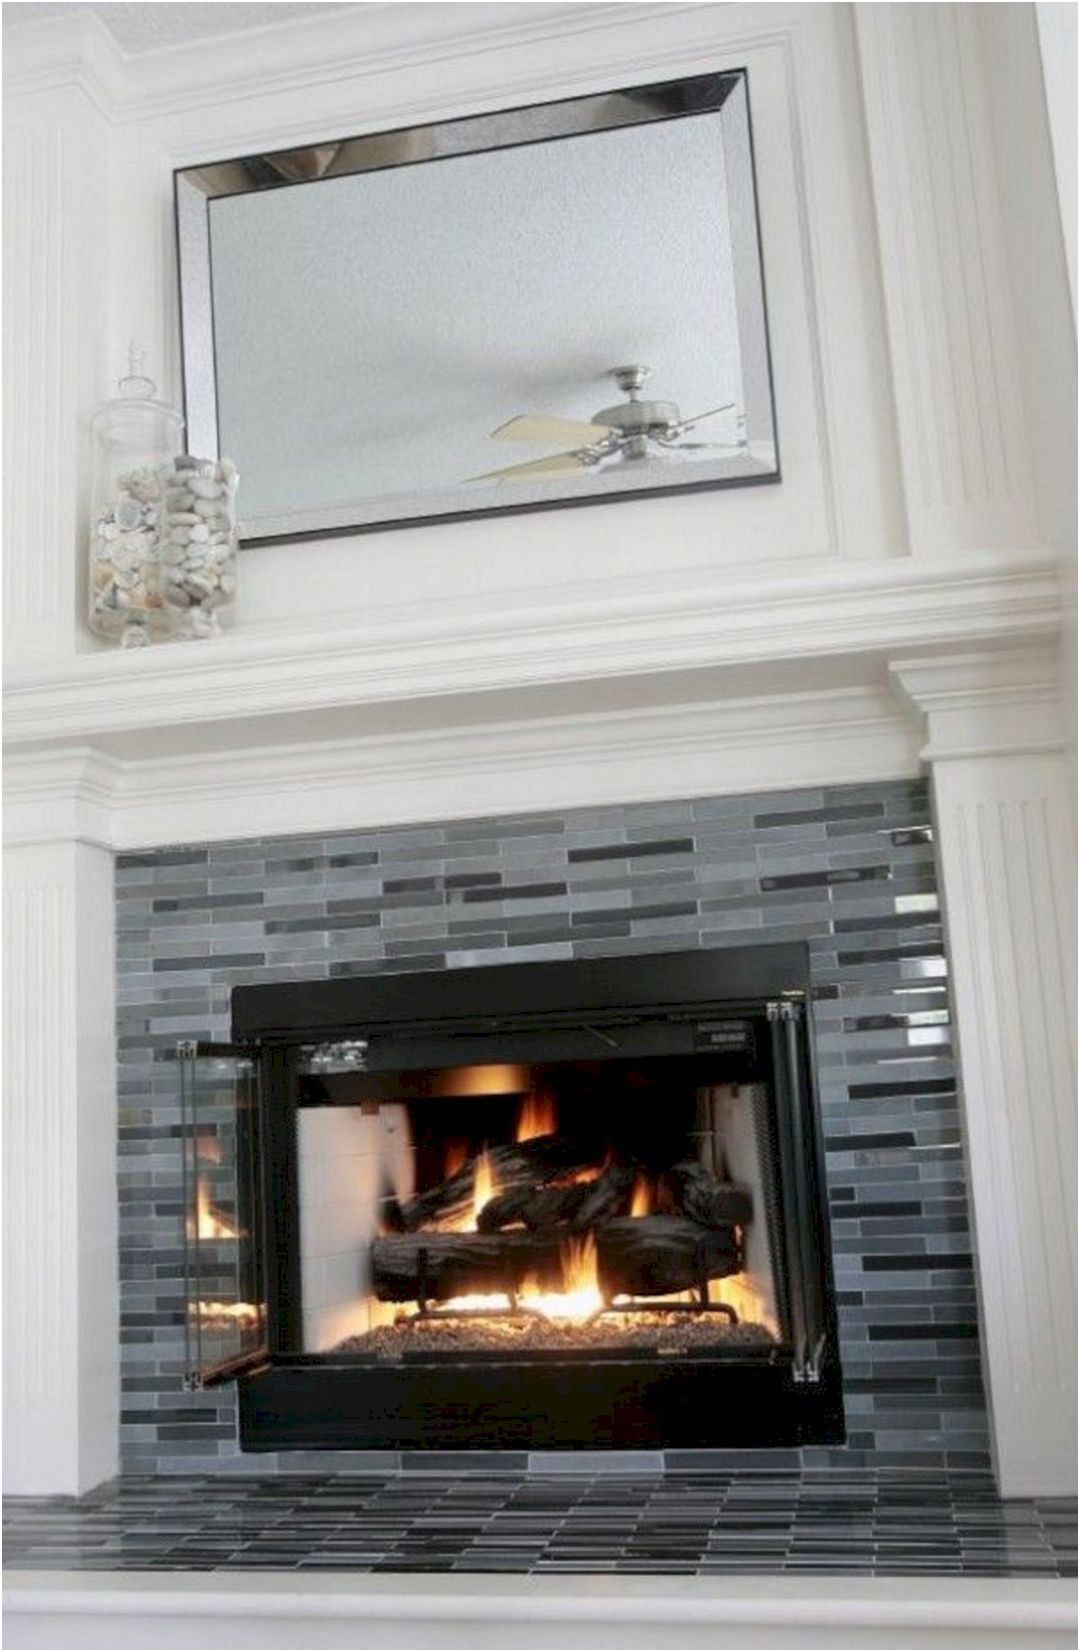 New Fireplace Tiling Ideas